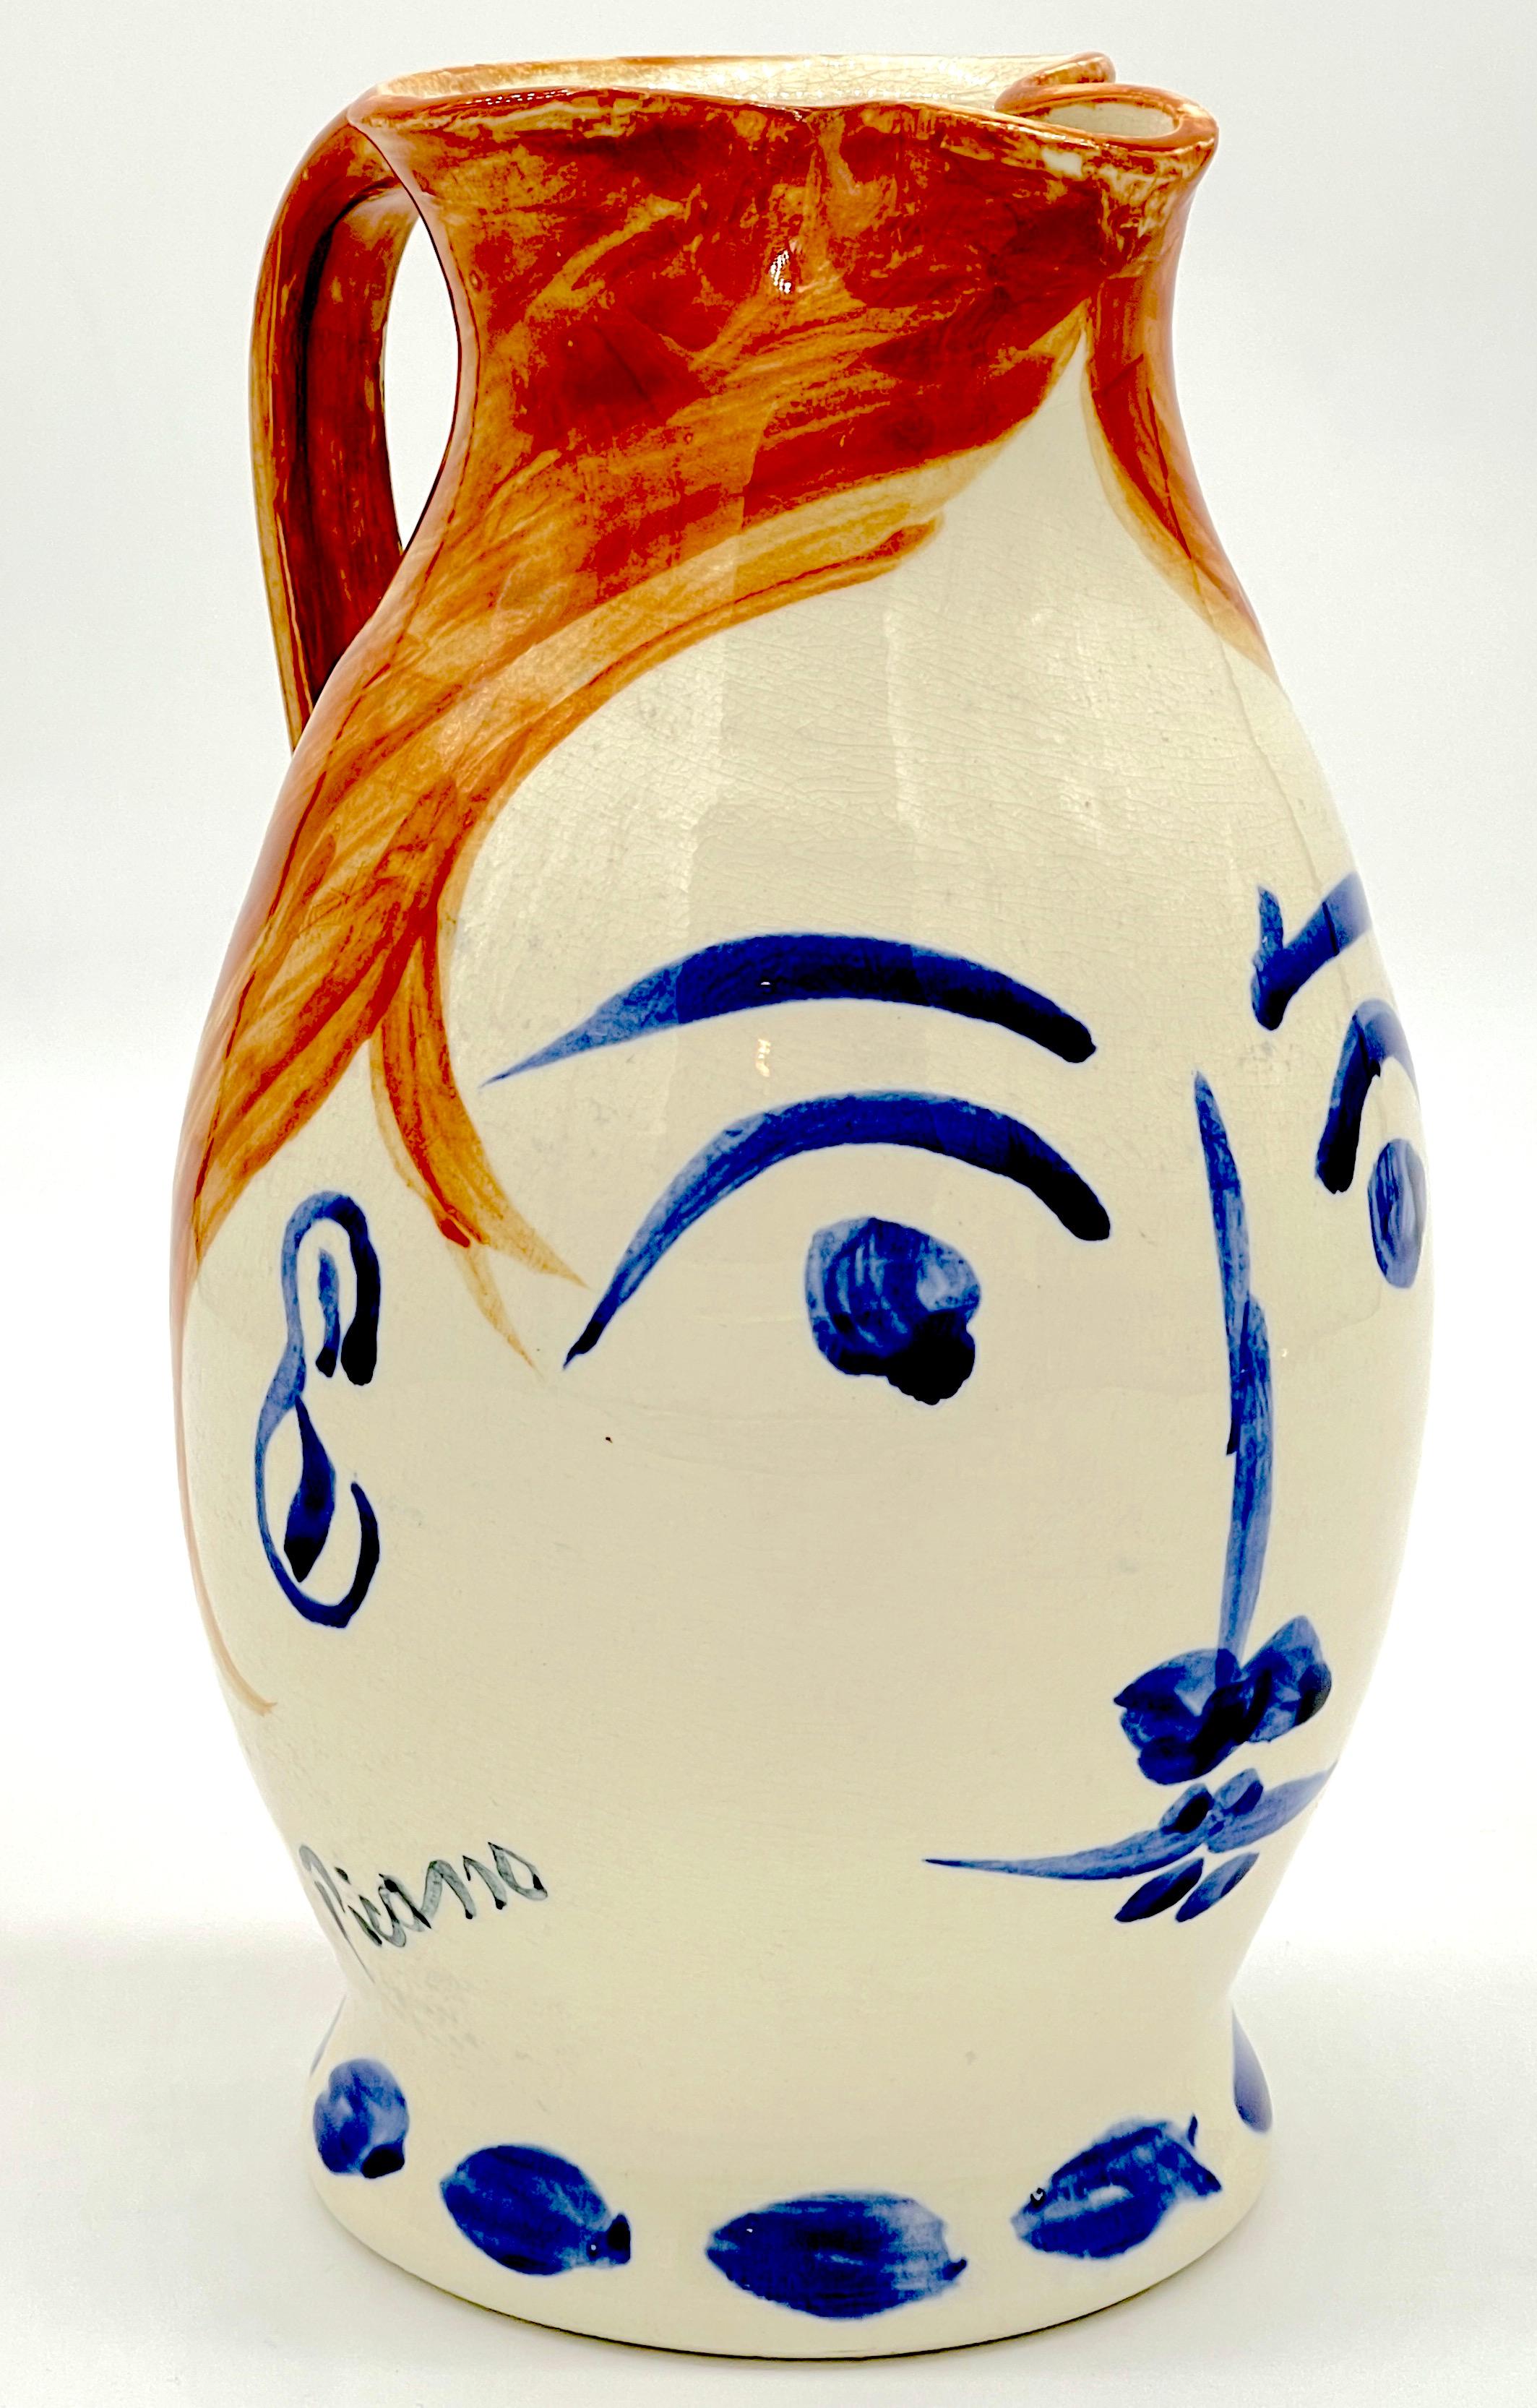 Stamped Edition Padilla Picasso Pottery 'Chope Visage' Pitcher  
After Pablo Picasso, Signed on the front  'Picasso' in blue script 
Stamped 'Fem co  1994 Edition 5A /500 Picasso by Padilla Mexico'

Enjoy the artistic legacy of the Padilla Pablo